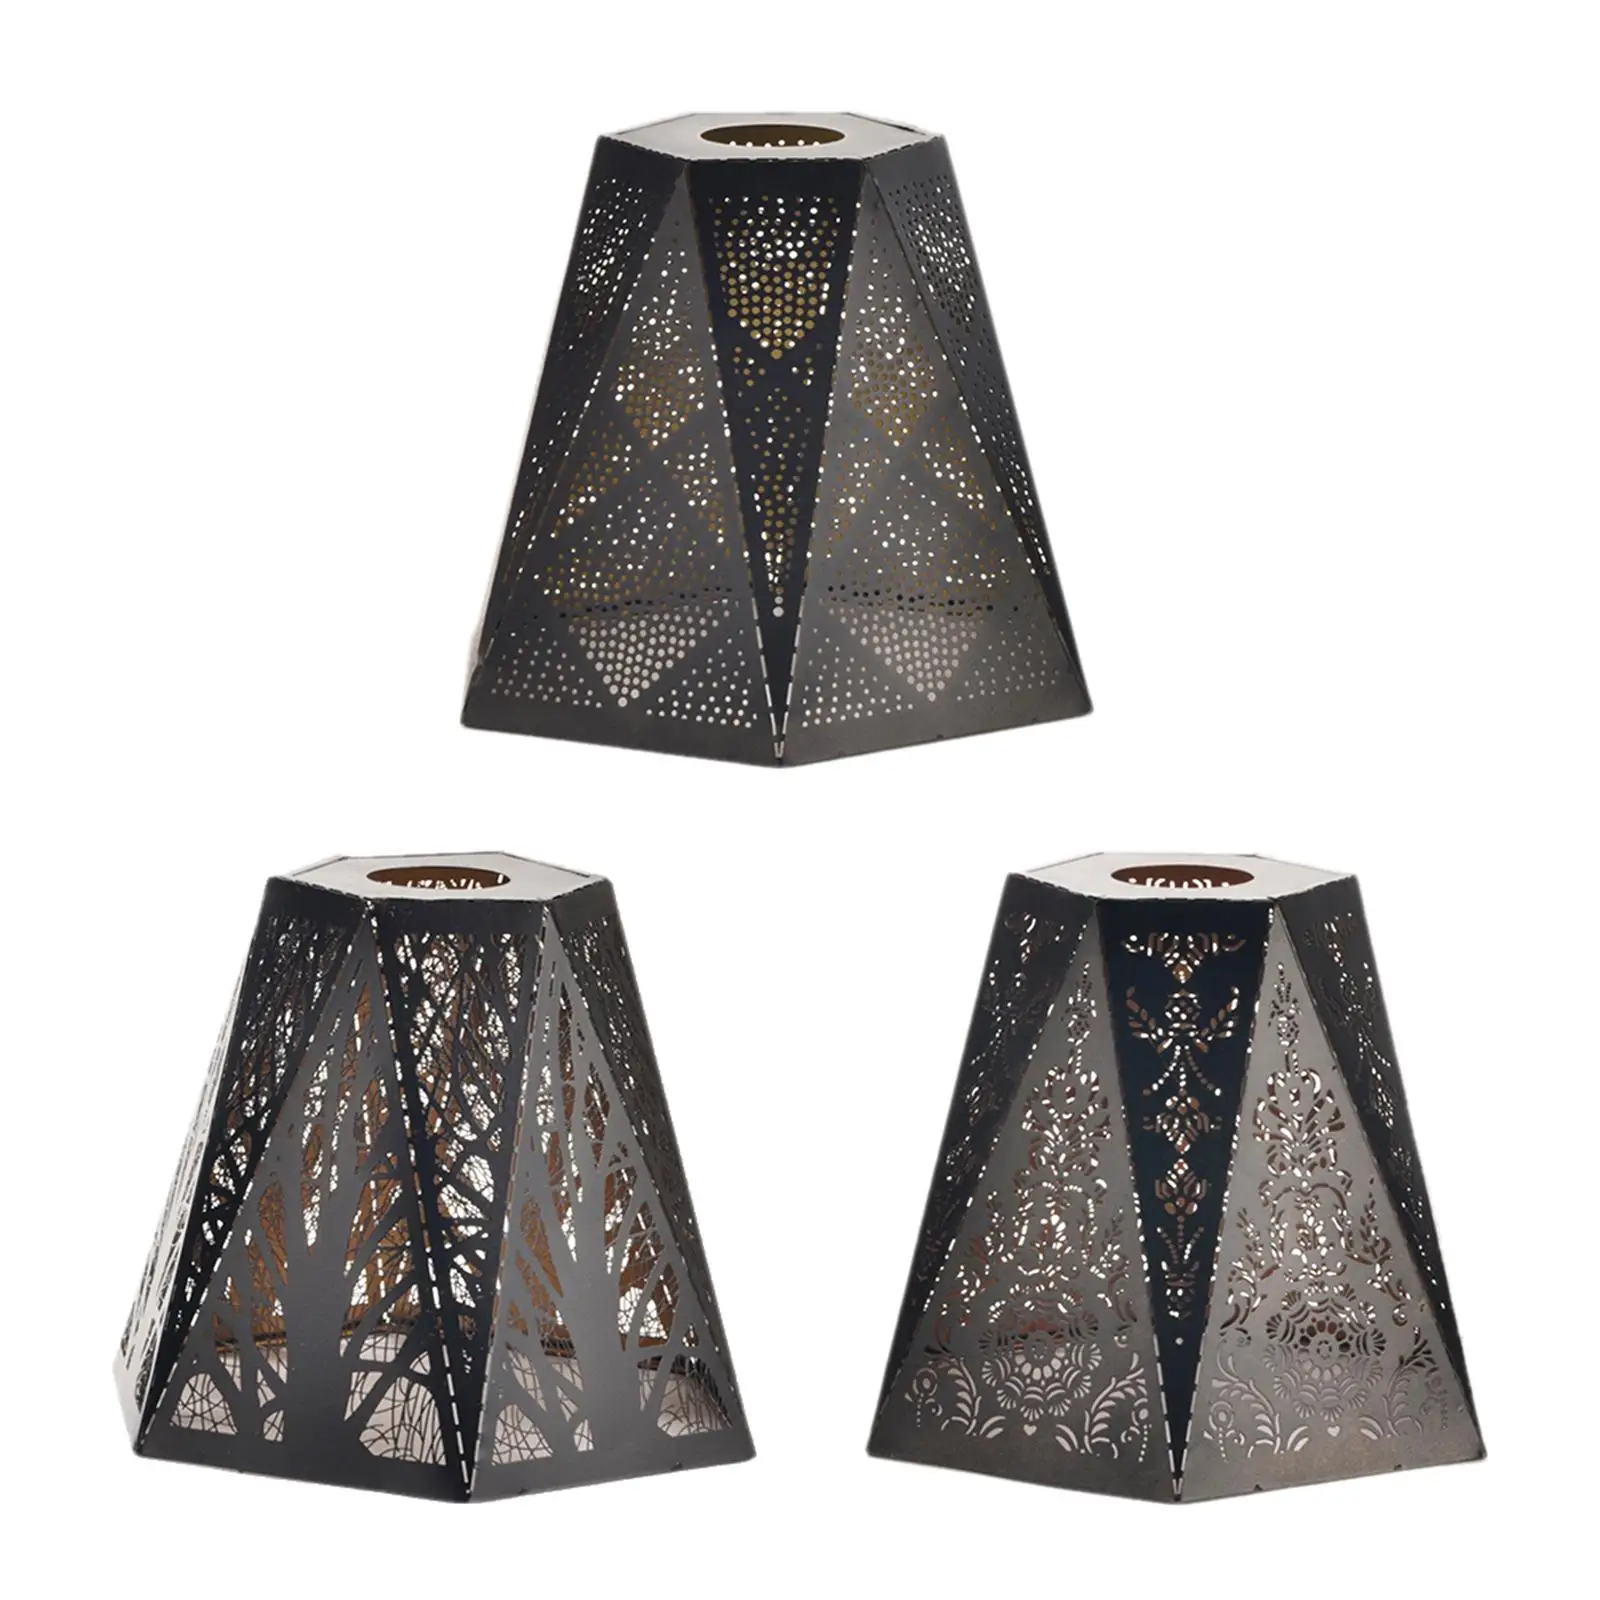 Modern Fashion Lamp Shade Iron Lampshade Carving Metal Cage Lamp Shade Cover for Kitchen Island Bedroom Hotel Cafe Decor